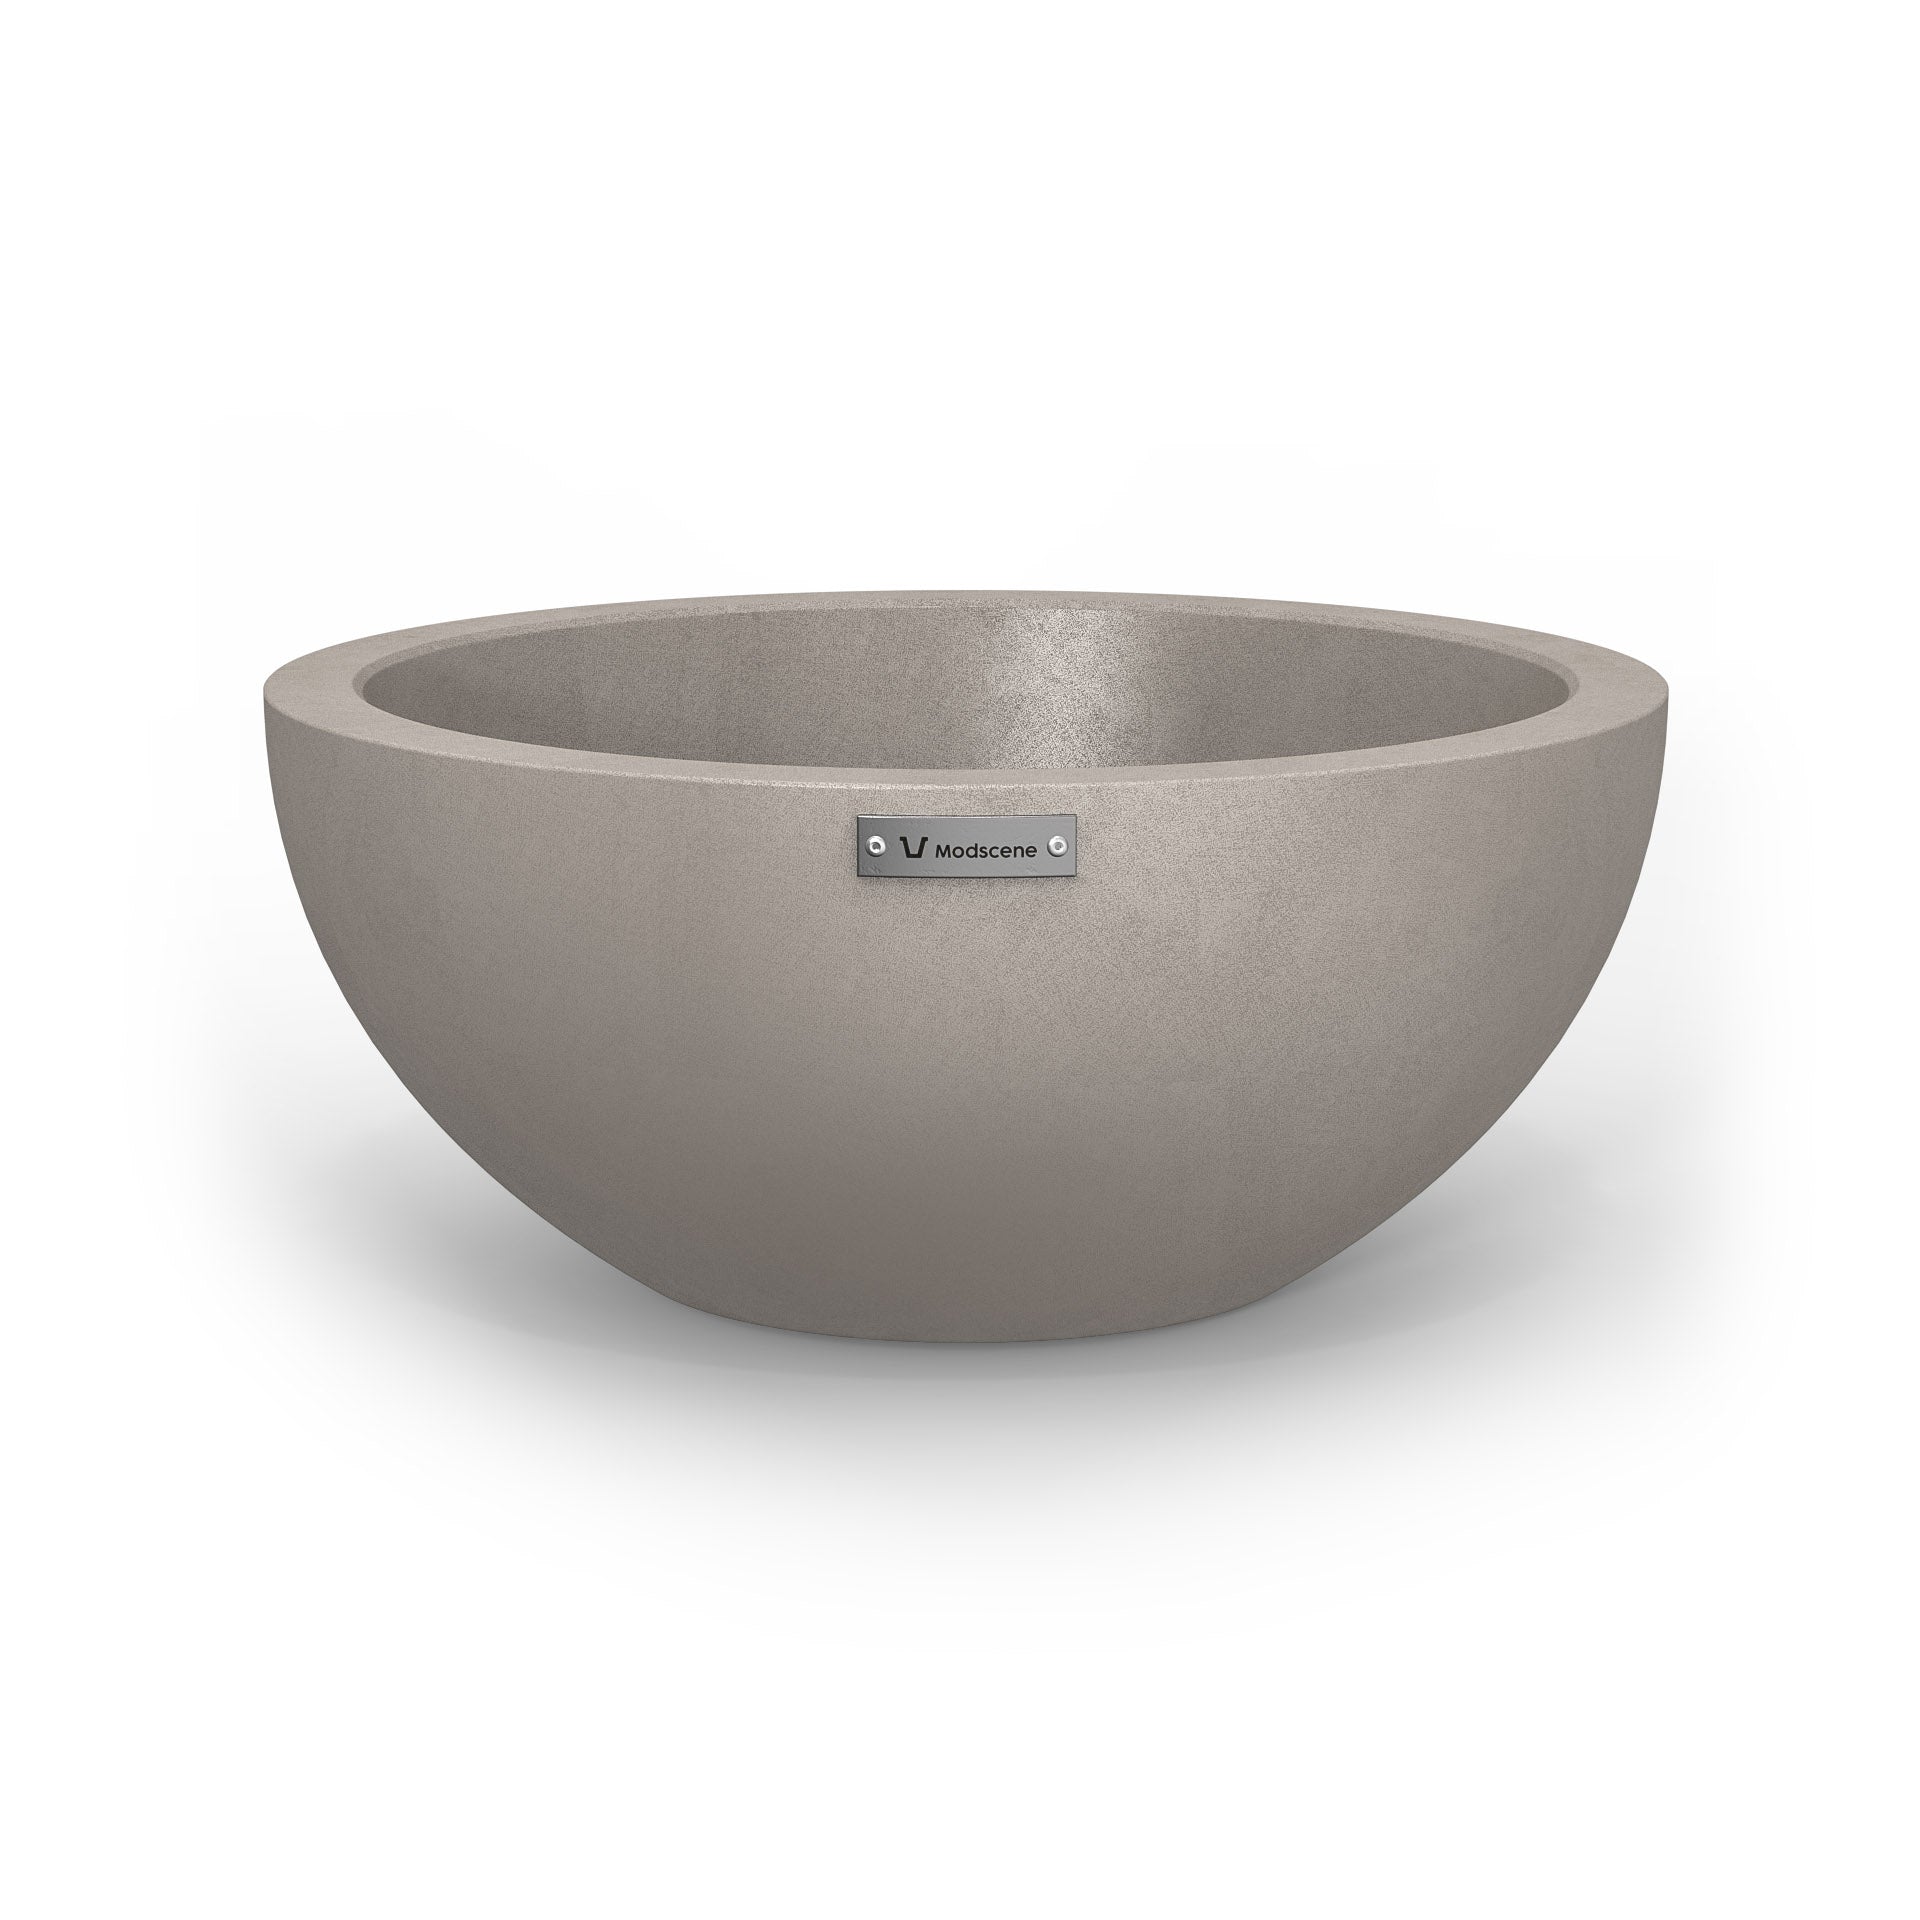 A small planter bowl in a sandstone grey colour with a concrete look finish.